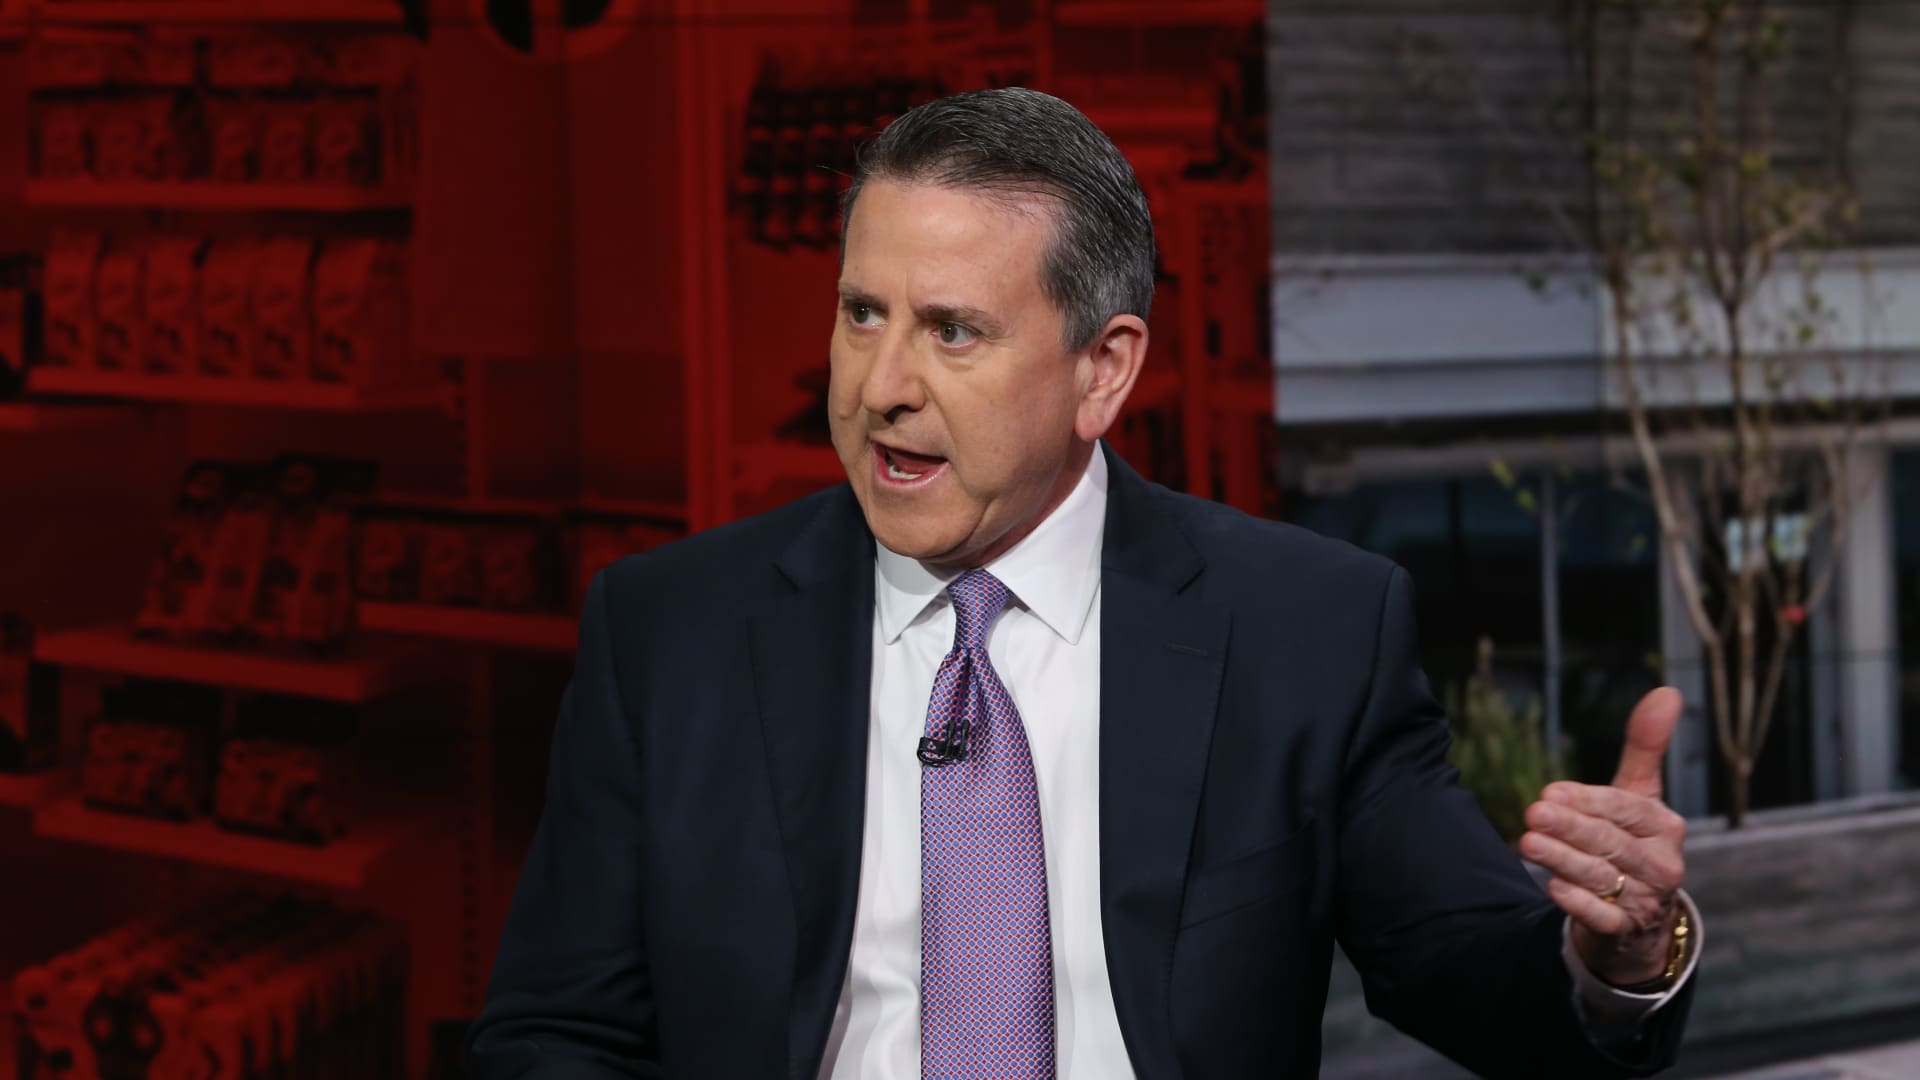 Target CEO Brian Cornell to stay on for three more years, as company scraps retirement age